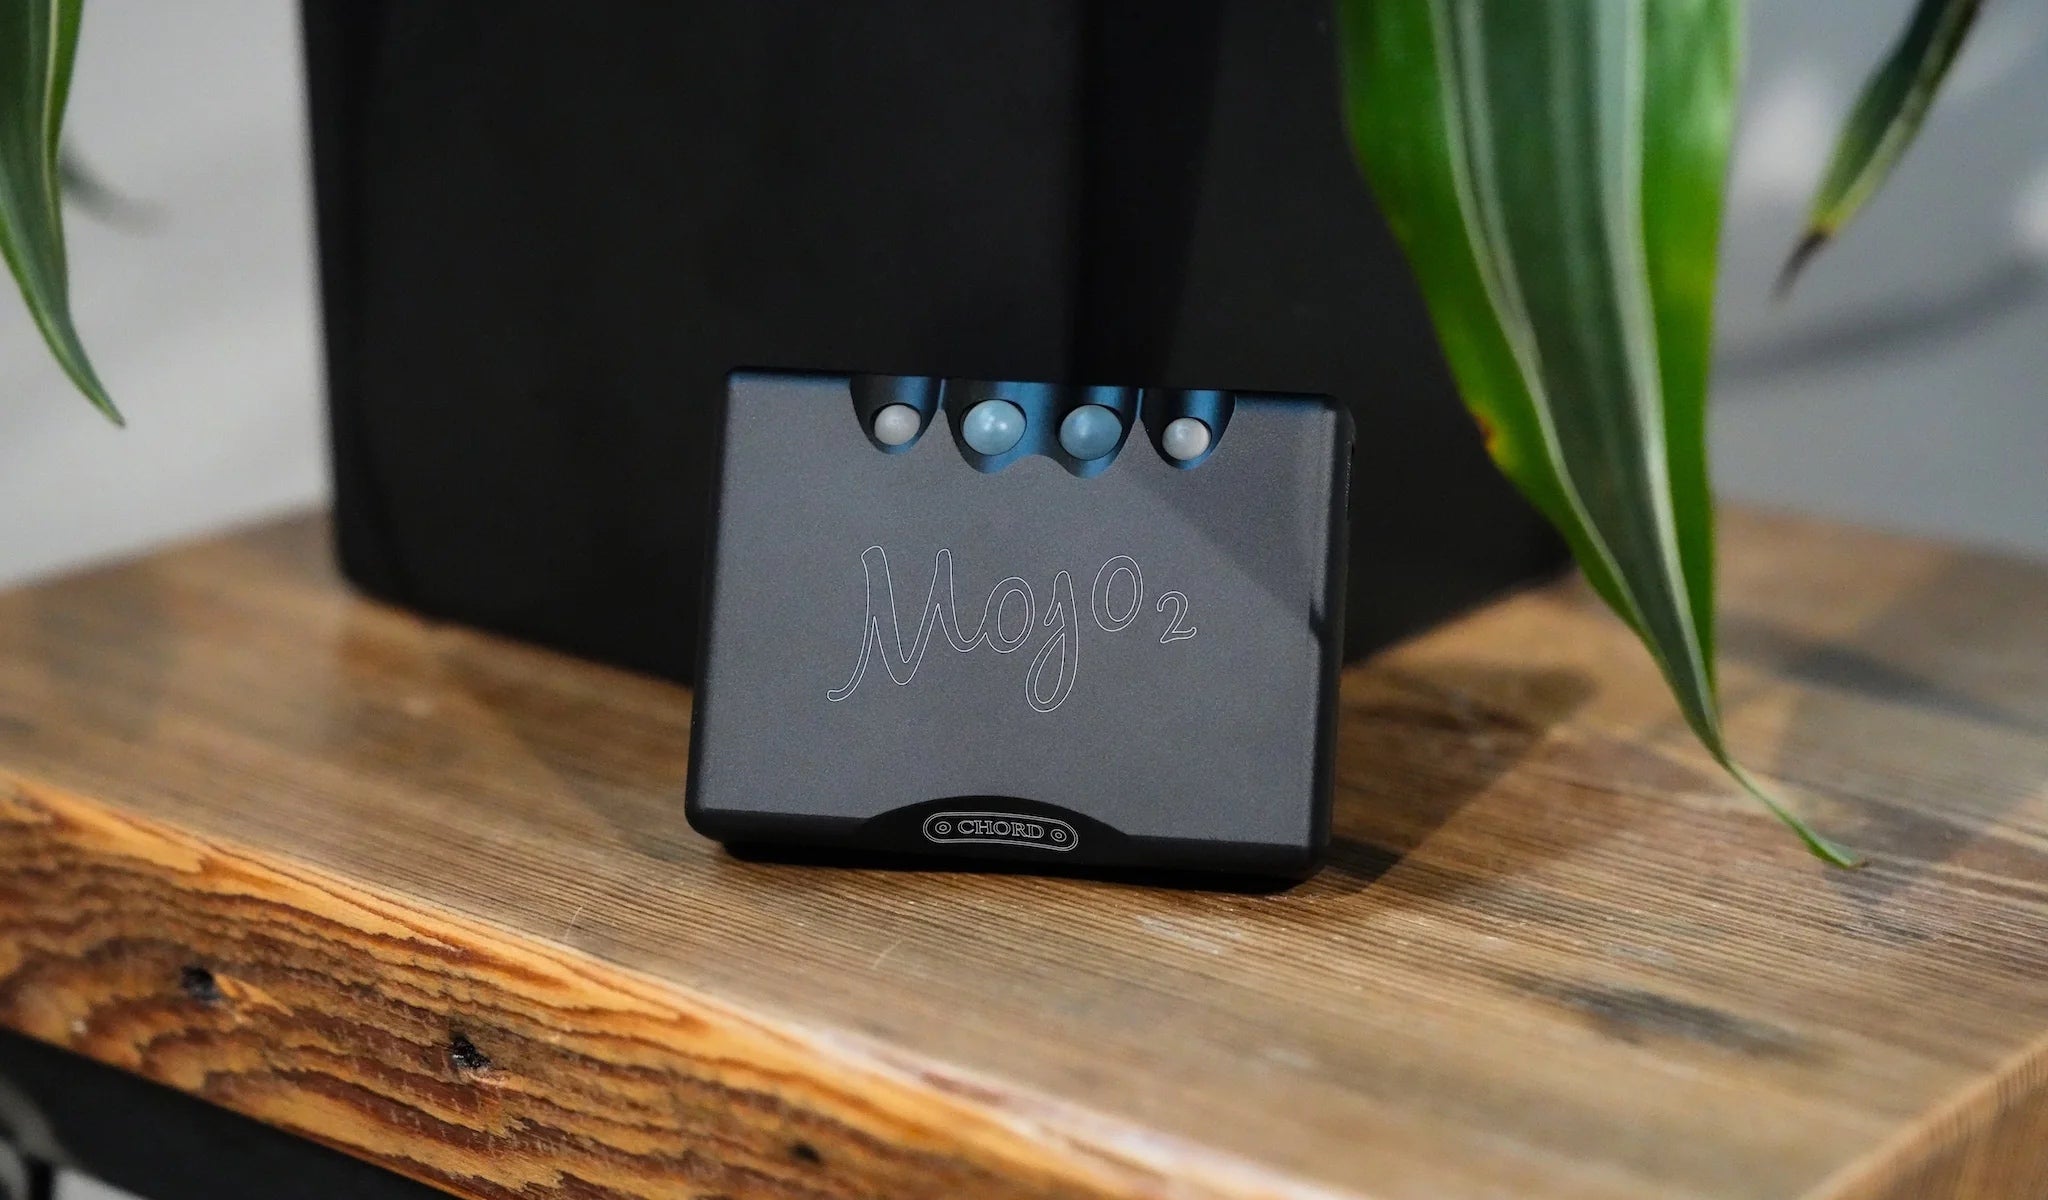 Chord Mojo 2 portable DAC on wood bench with plant